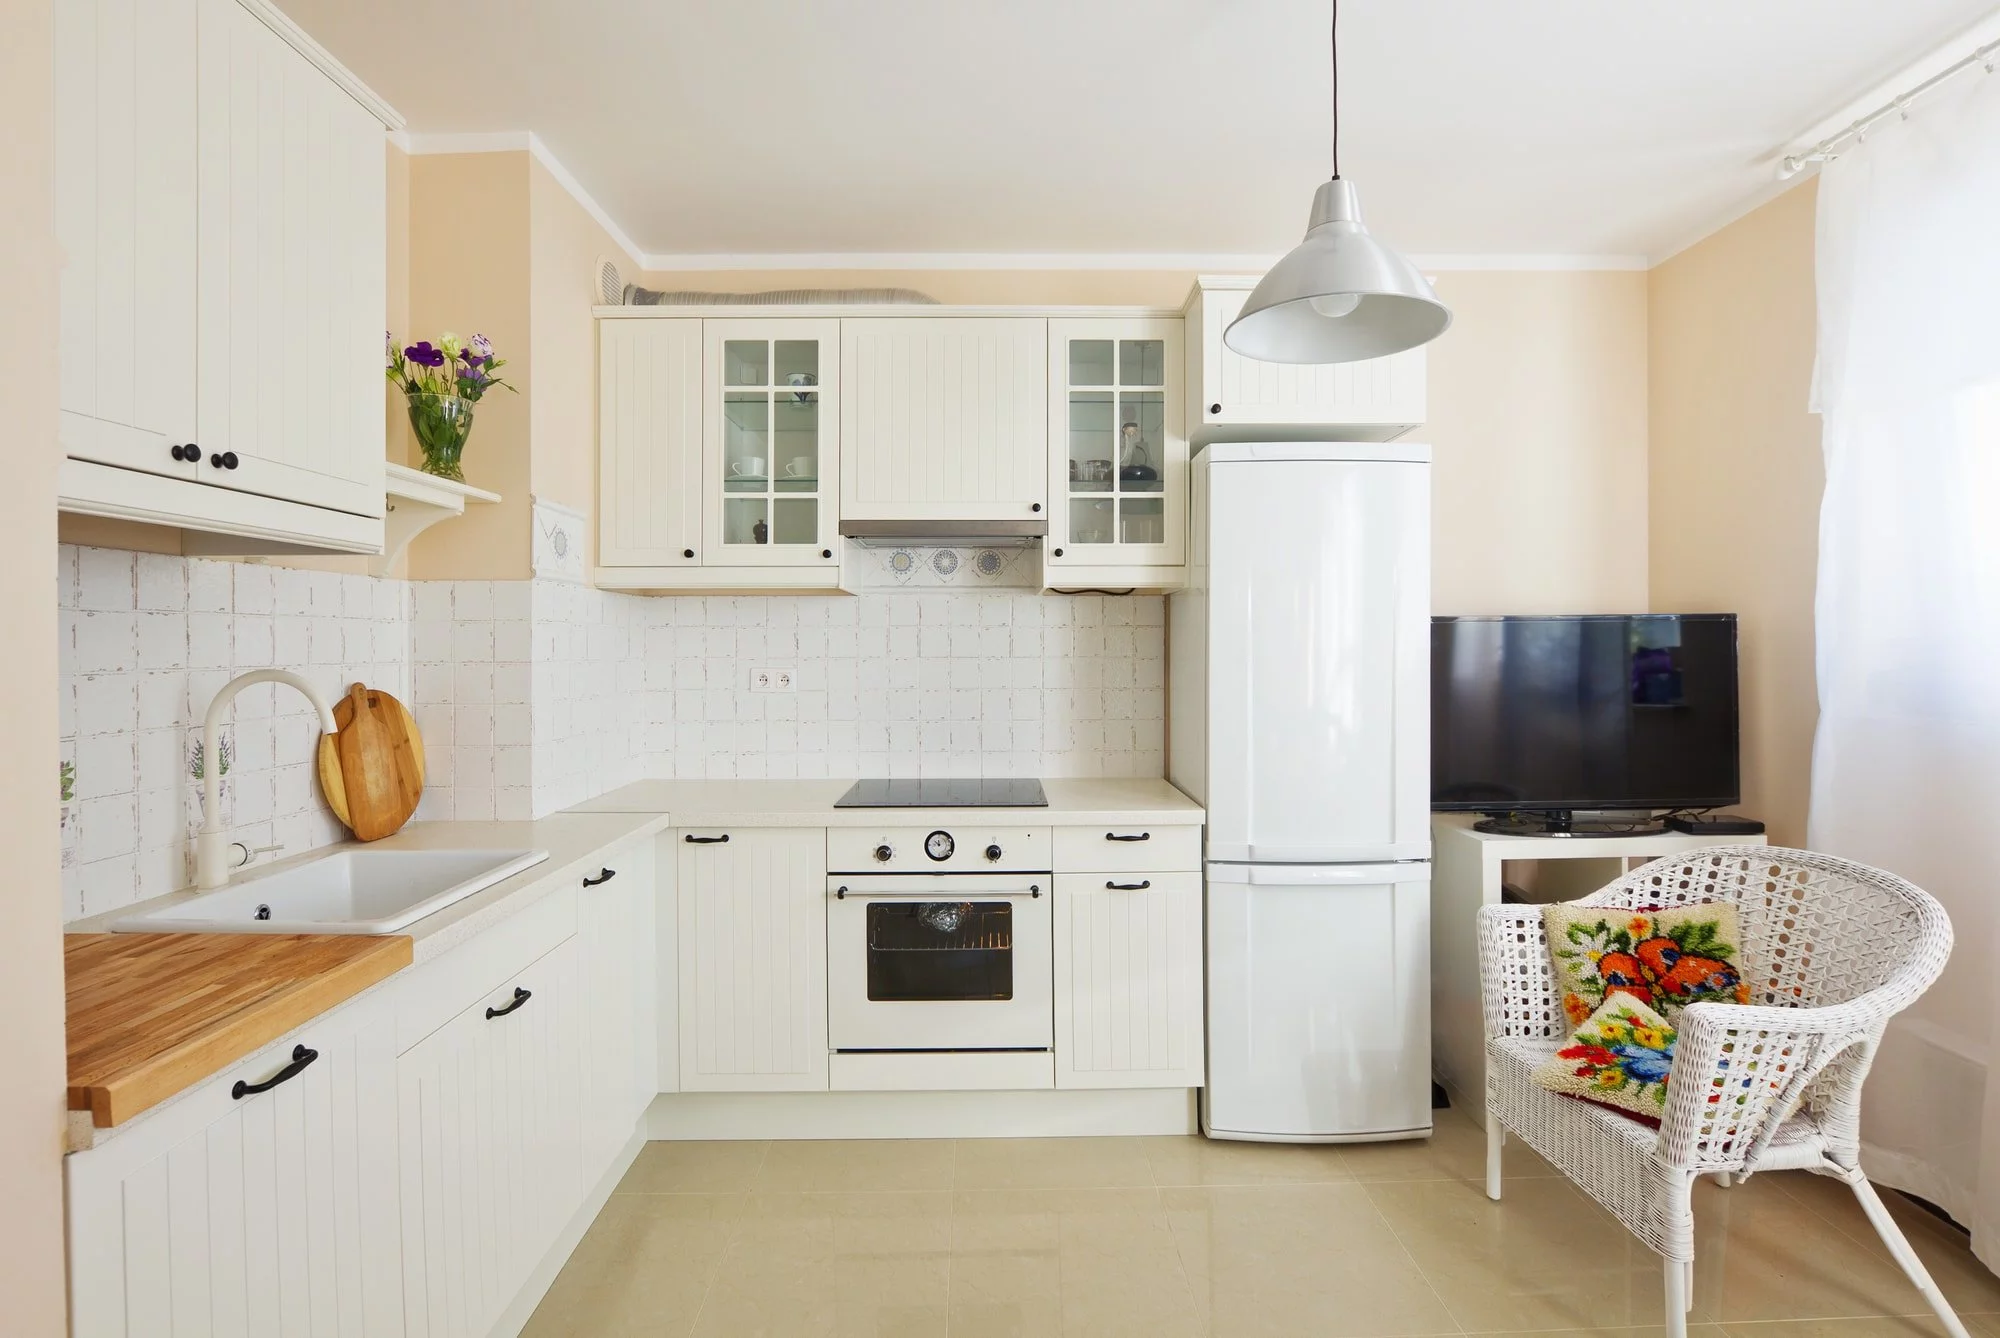 From Crowded to Comfortable: Remodeling Ideas for a Small Kitchen